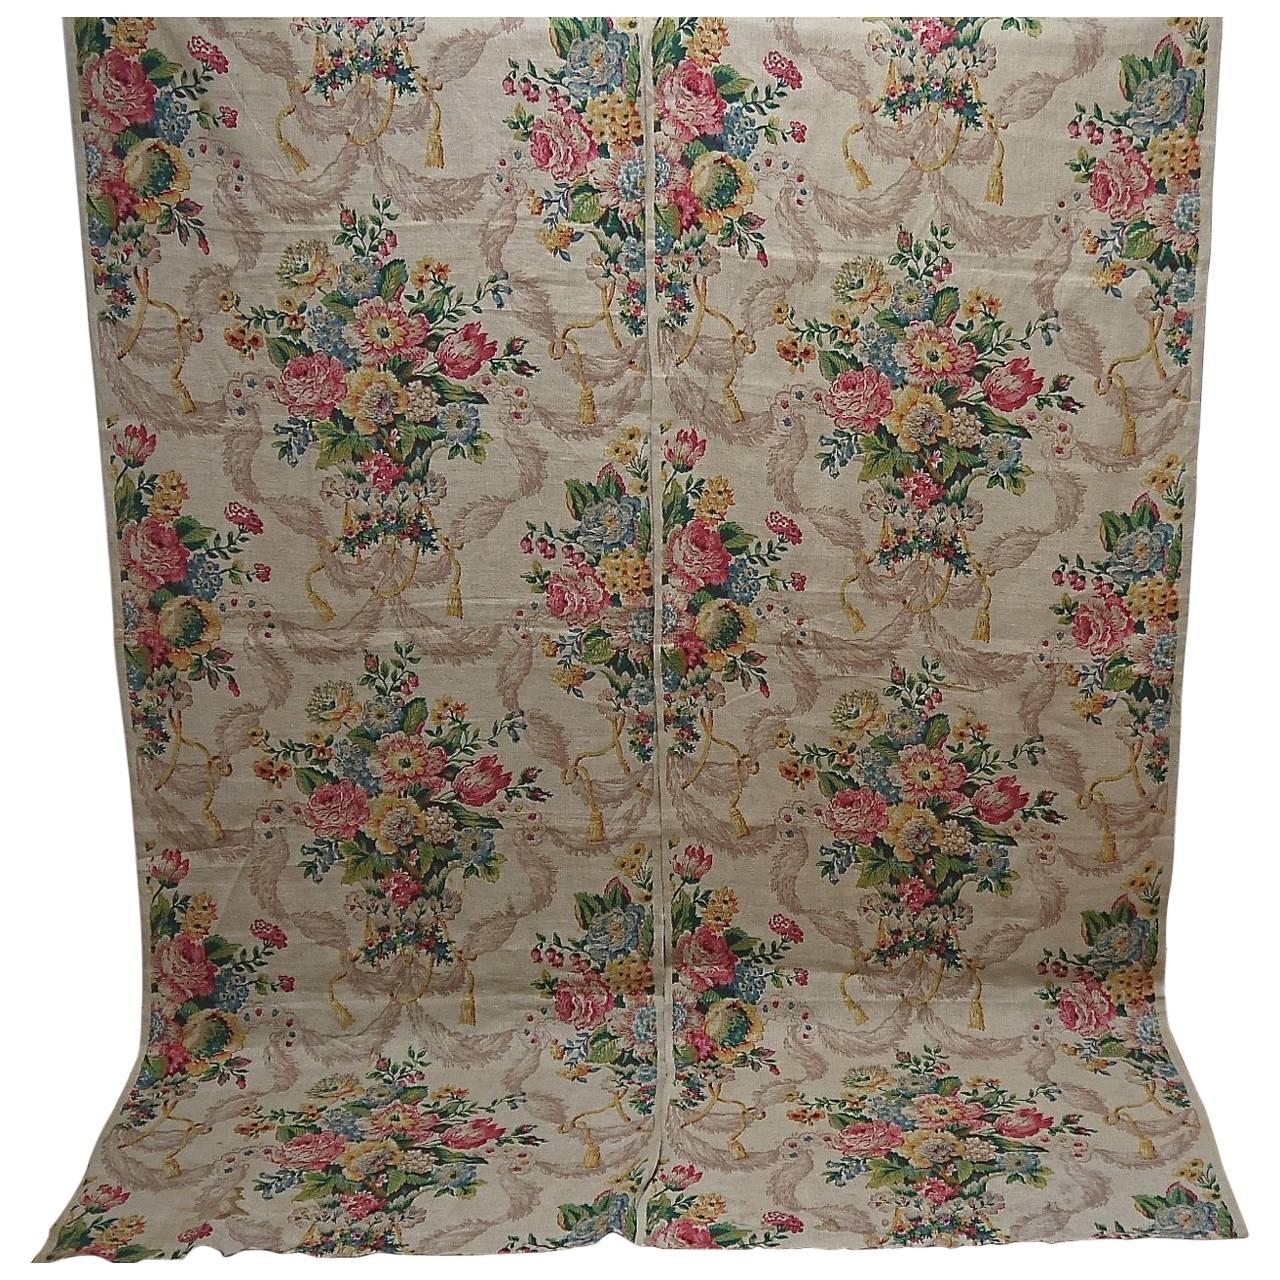 English Pair Linen Panels Printedwith Flowers and Swagged Tassels, circa 1920s